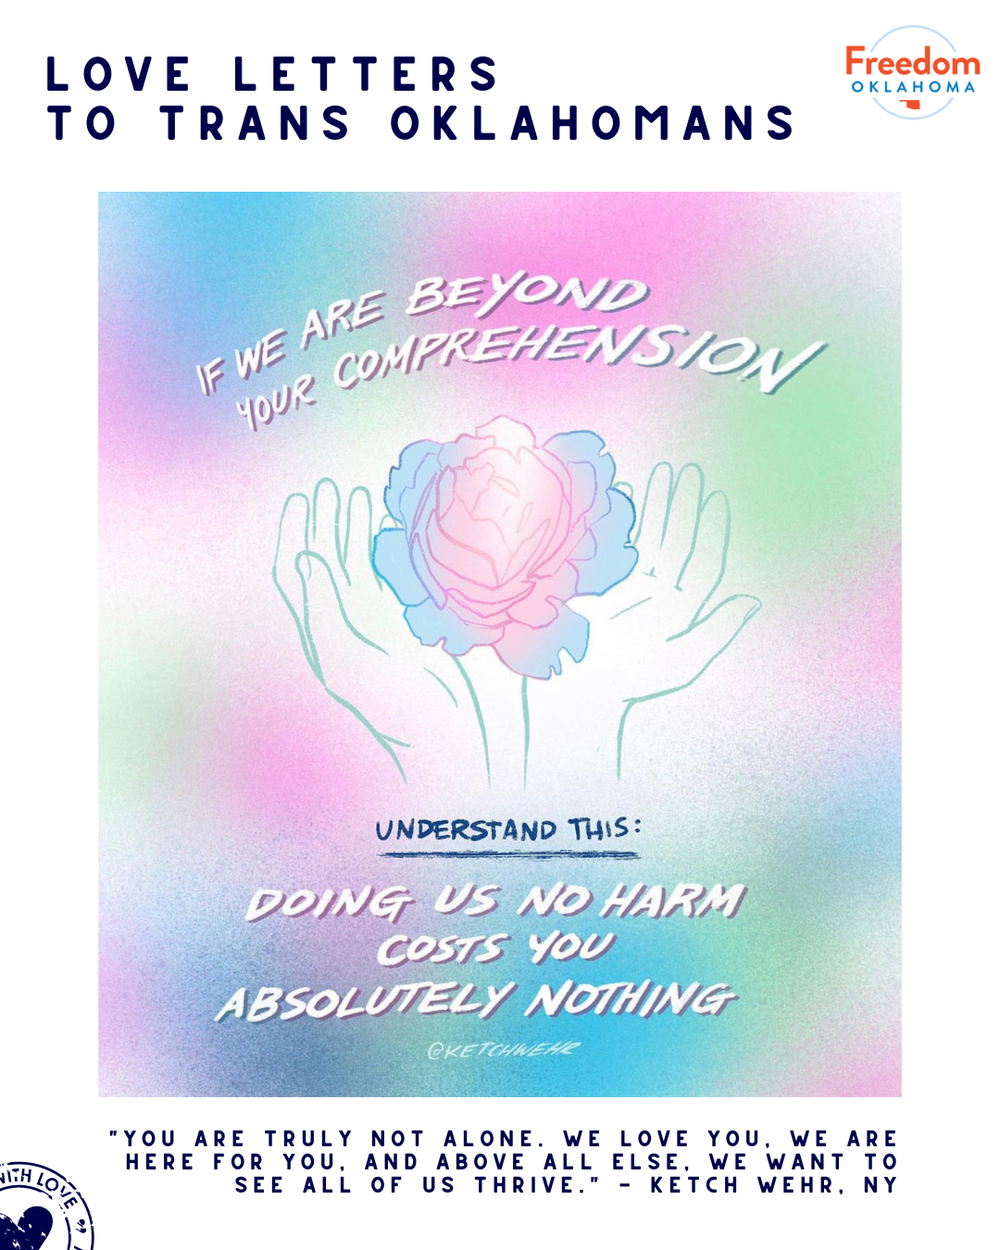  "Love Letters to Trans Oklahomans" and "You are truly not alone. We love you, we are here for you, and above all else, we want to see all of us thrive." - Ketch Wehr, NY" with their art submission. ID for the art: Original art by @ketchwehr. There i